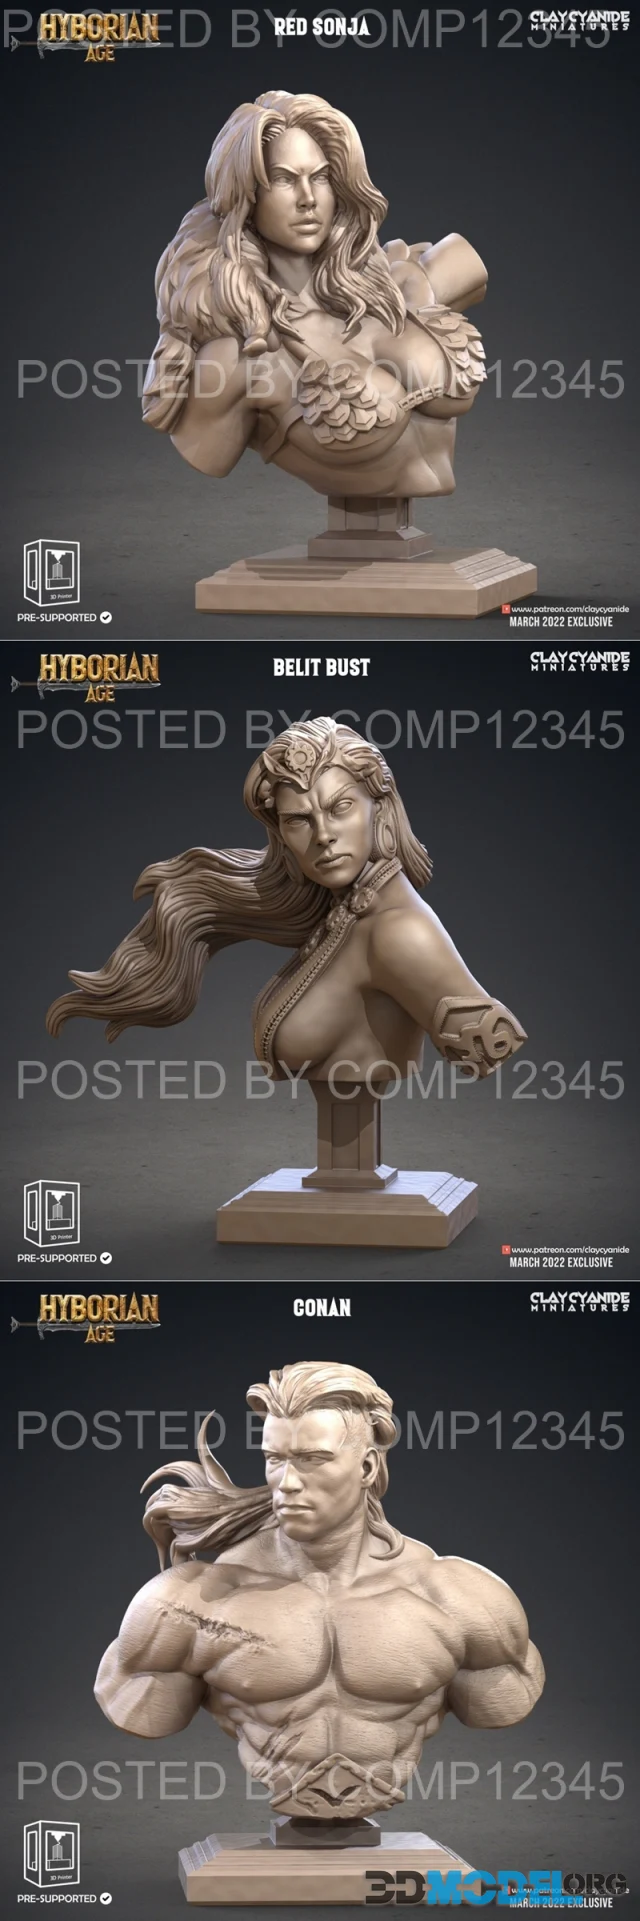 Red Sonja Bust and Belit Bust and Conan Bust – Printable